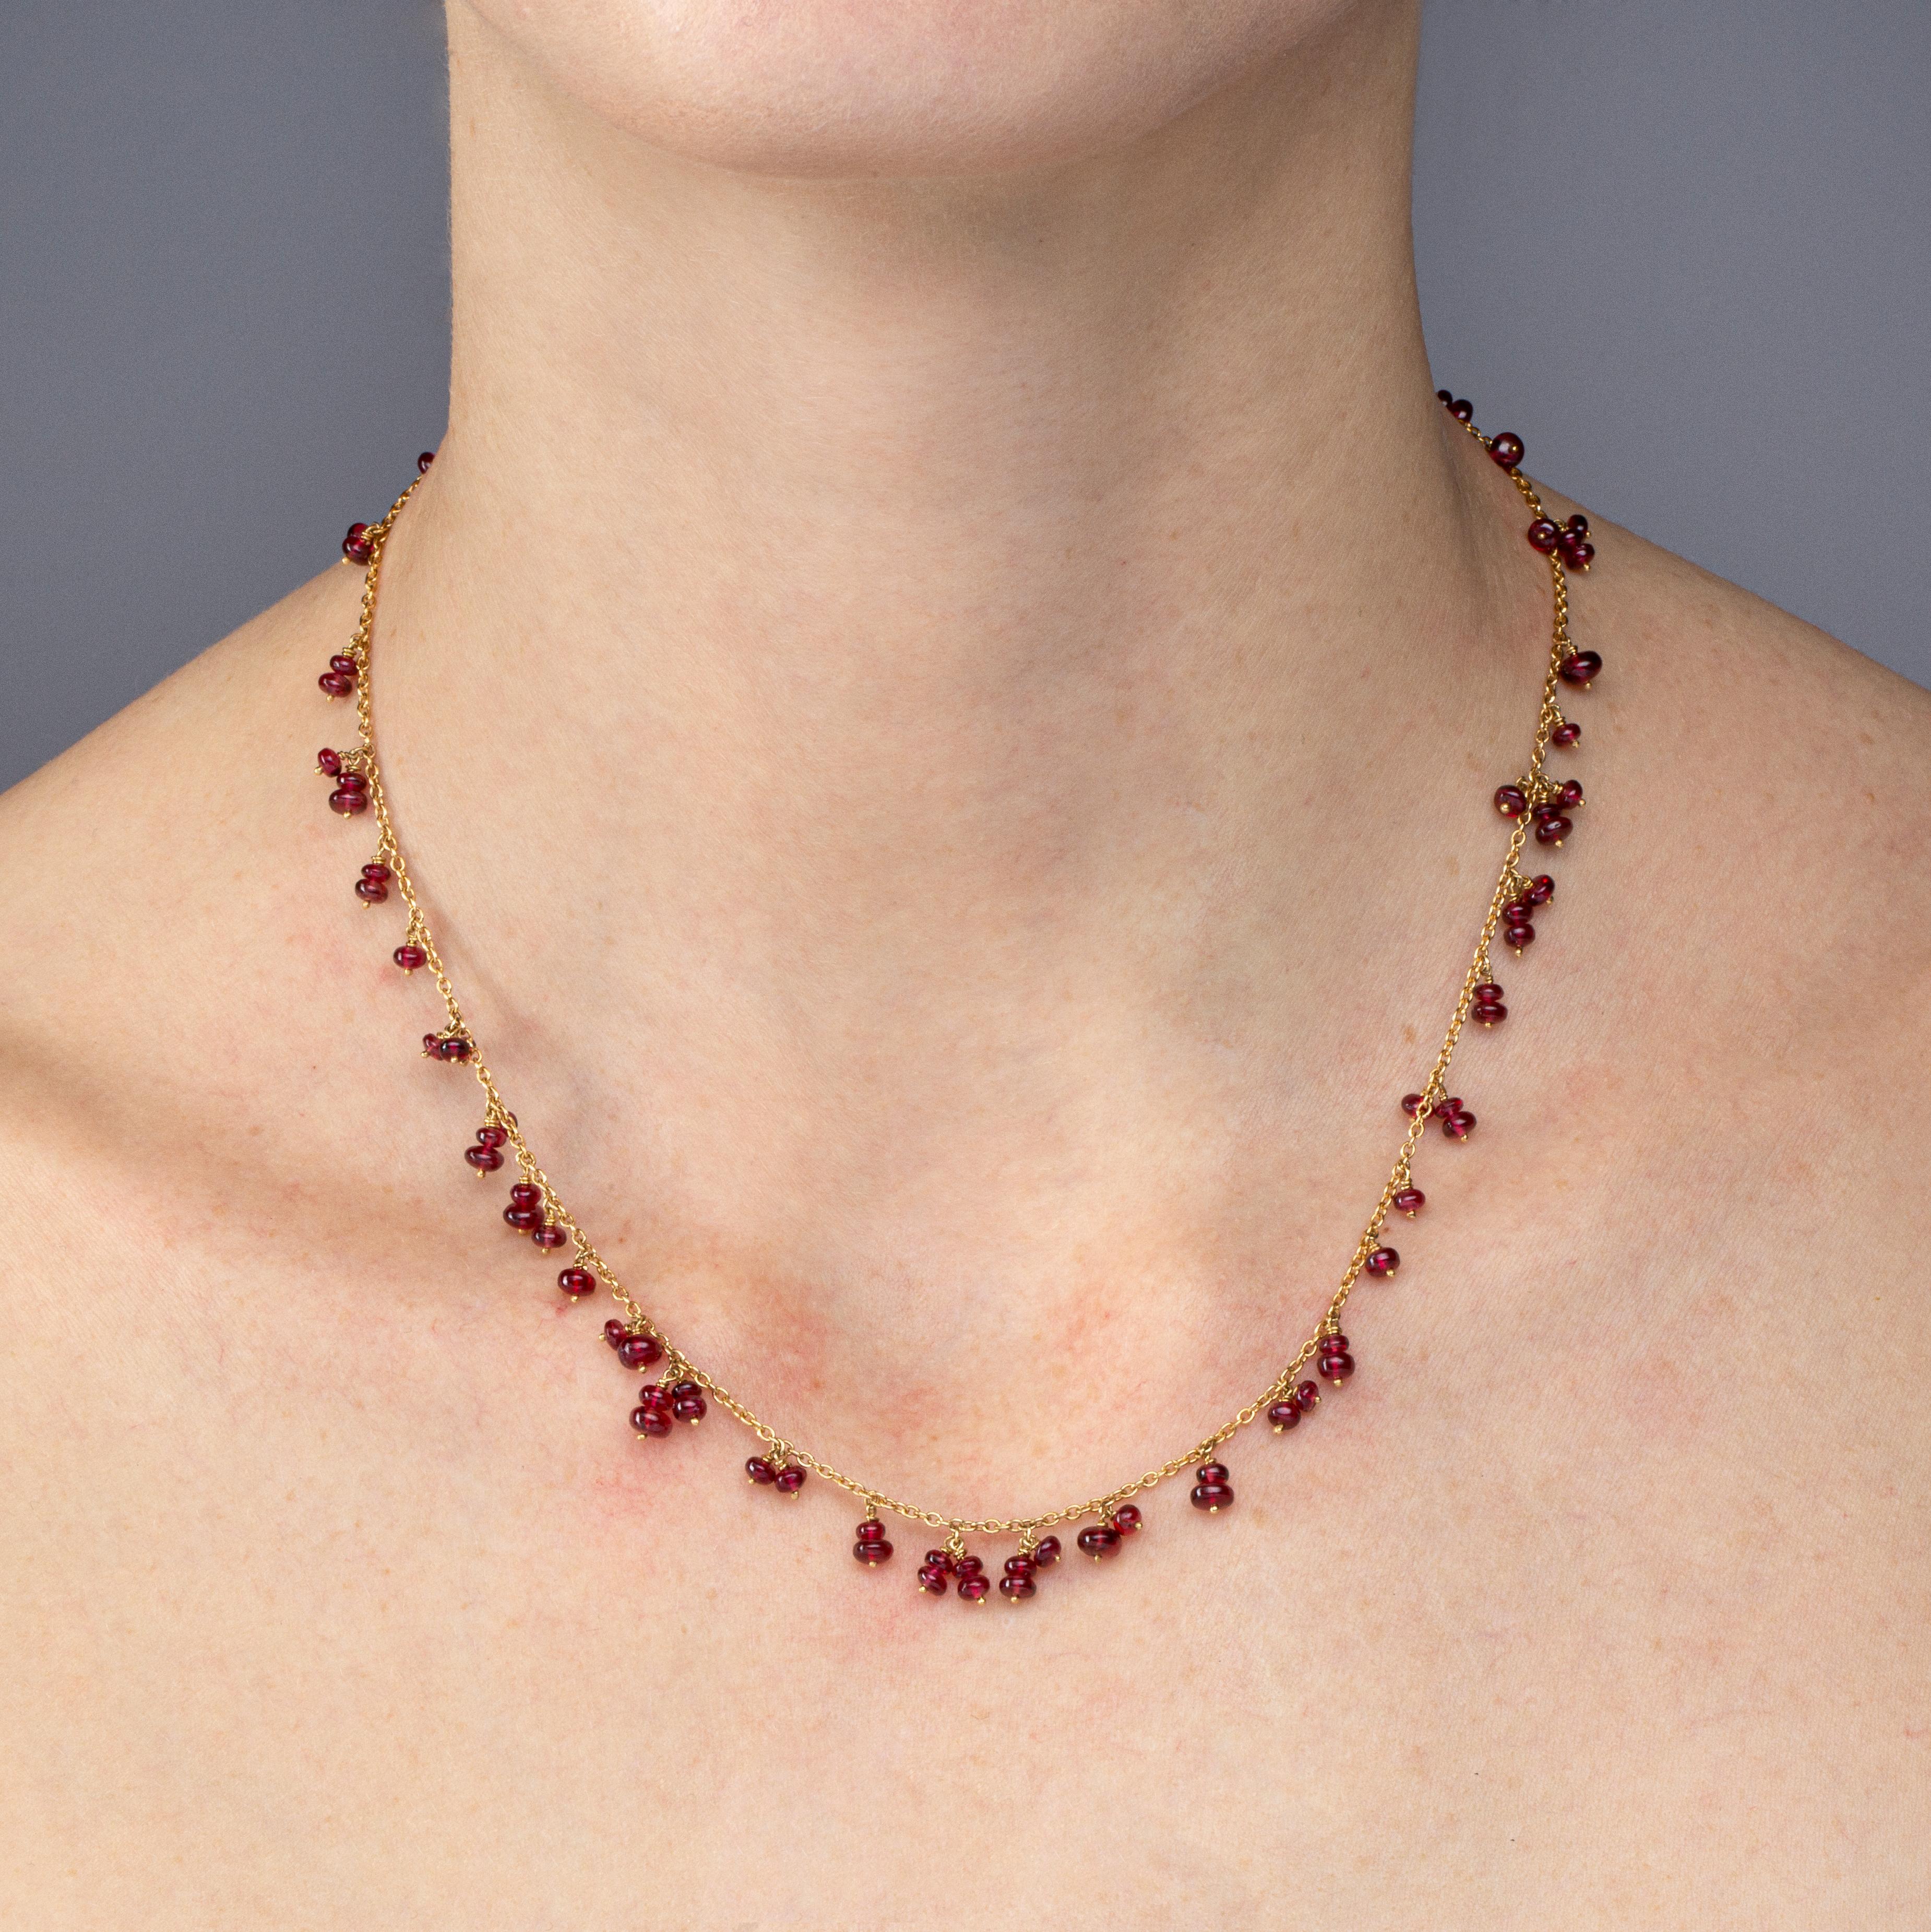 Alex Jona design collection, hand crafted in Italy, 18 karat yellow gold chain necklace, featuring 22.10 carats of Burmese Red Spinels, cabochon beads.  
Dimension: L 17.71 in/ 45 cm X D 0.18 in/ 4,6 mm

Alex Jona jewels stand out, not only for